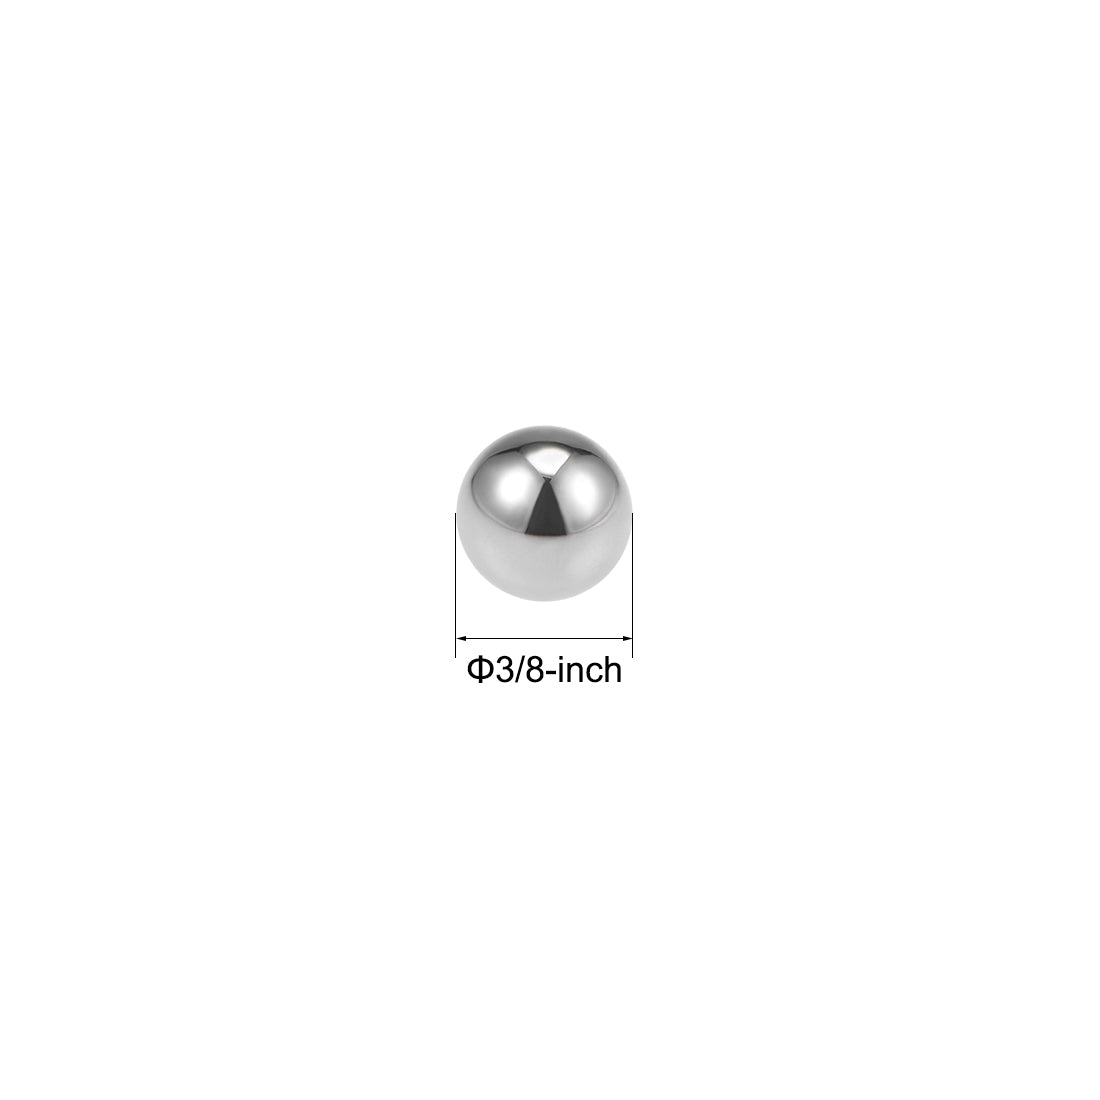 uxcell Uxcell Precision Balls 1/8" Solid Chrome Steel G10 for Ball Bearing Wheel 25pcs